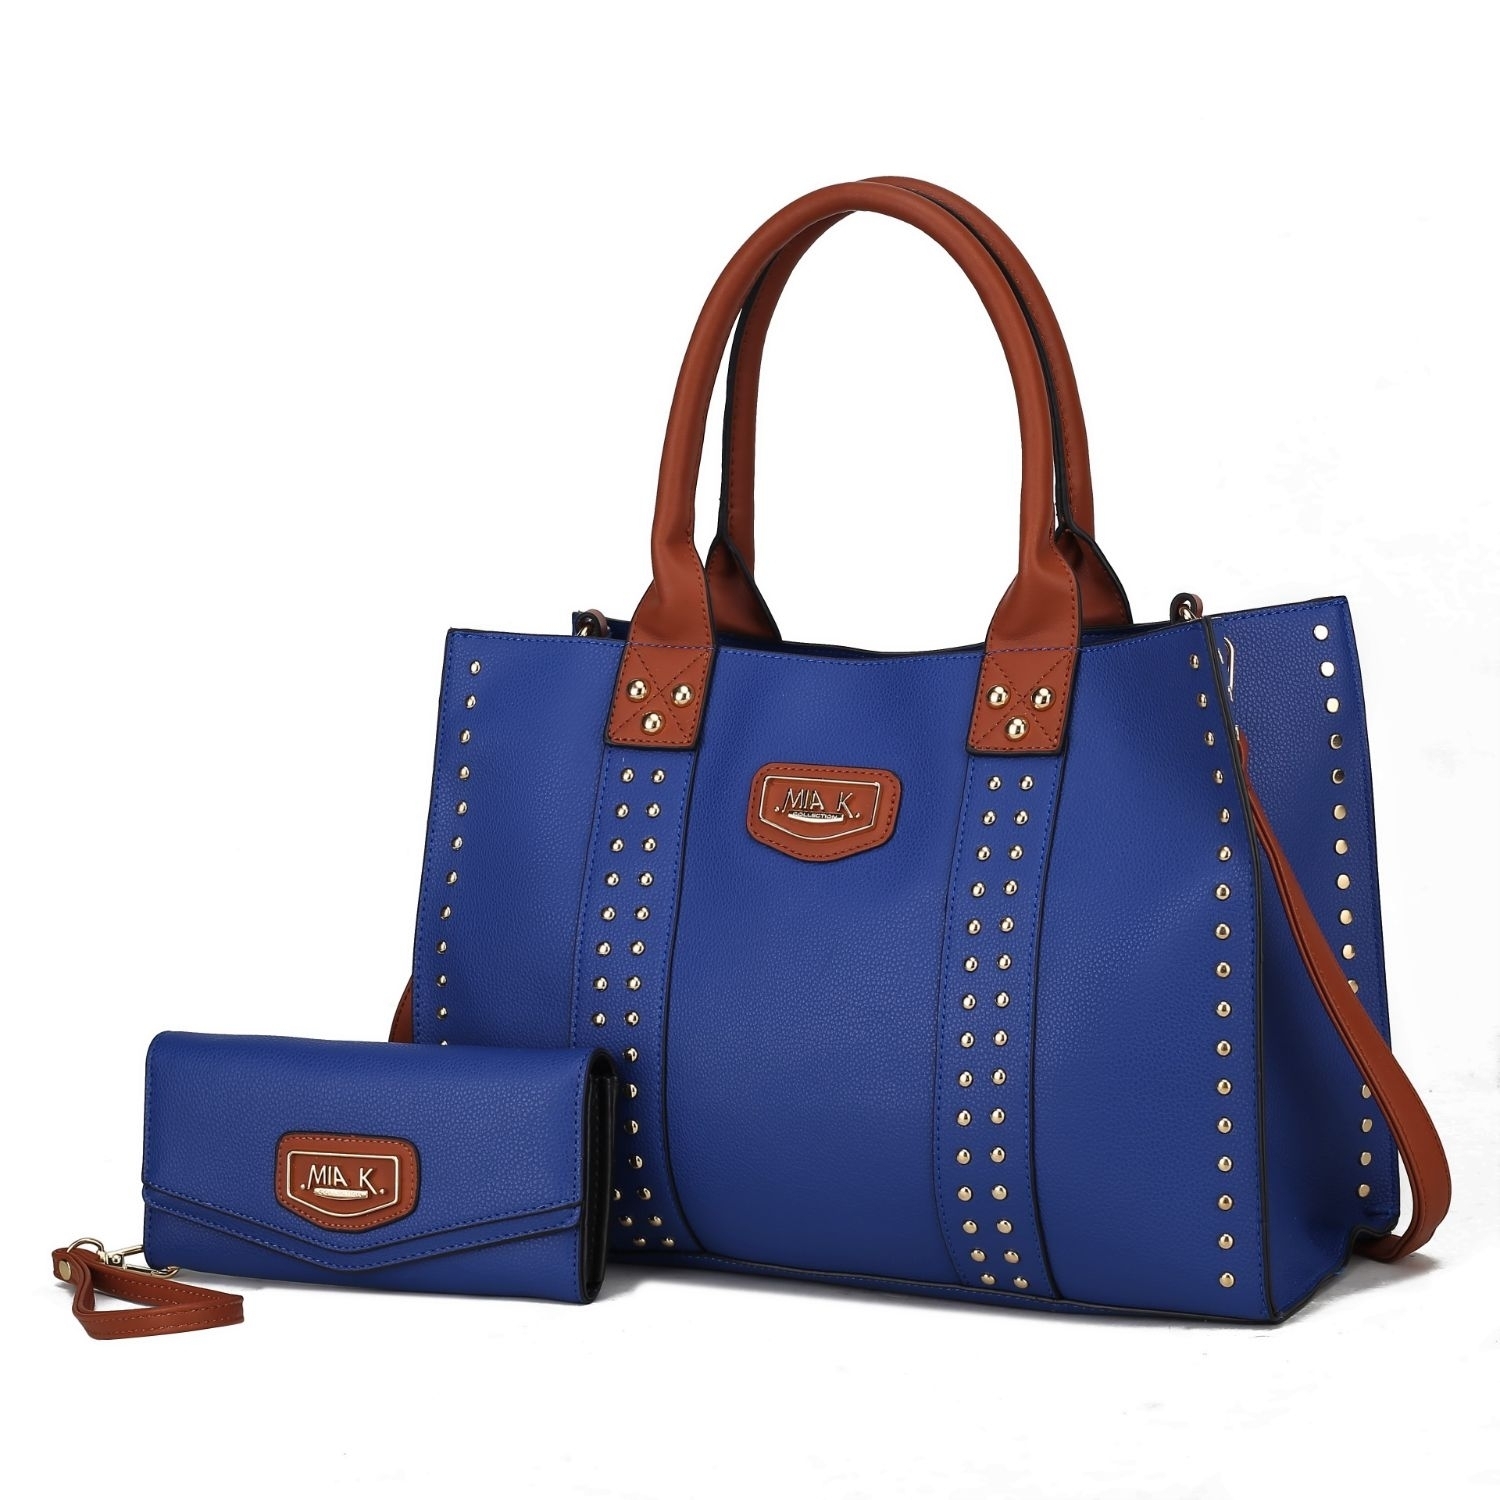 MKF Collection Davina Vegan Leather Women's Tote Handbag By Mia K With Wallet -2 Pieces - Royal Blue